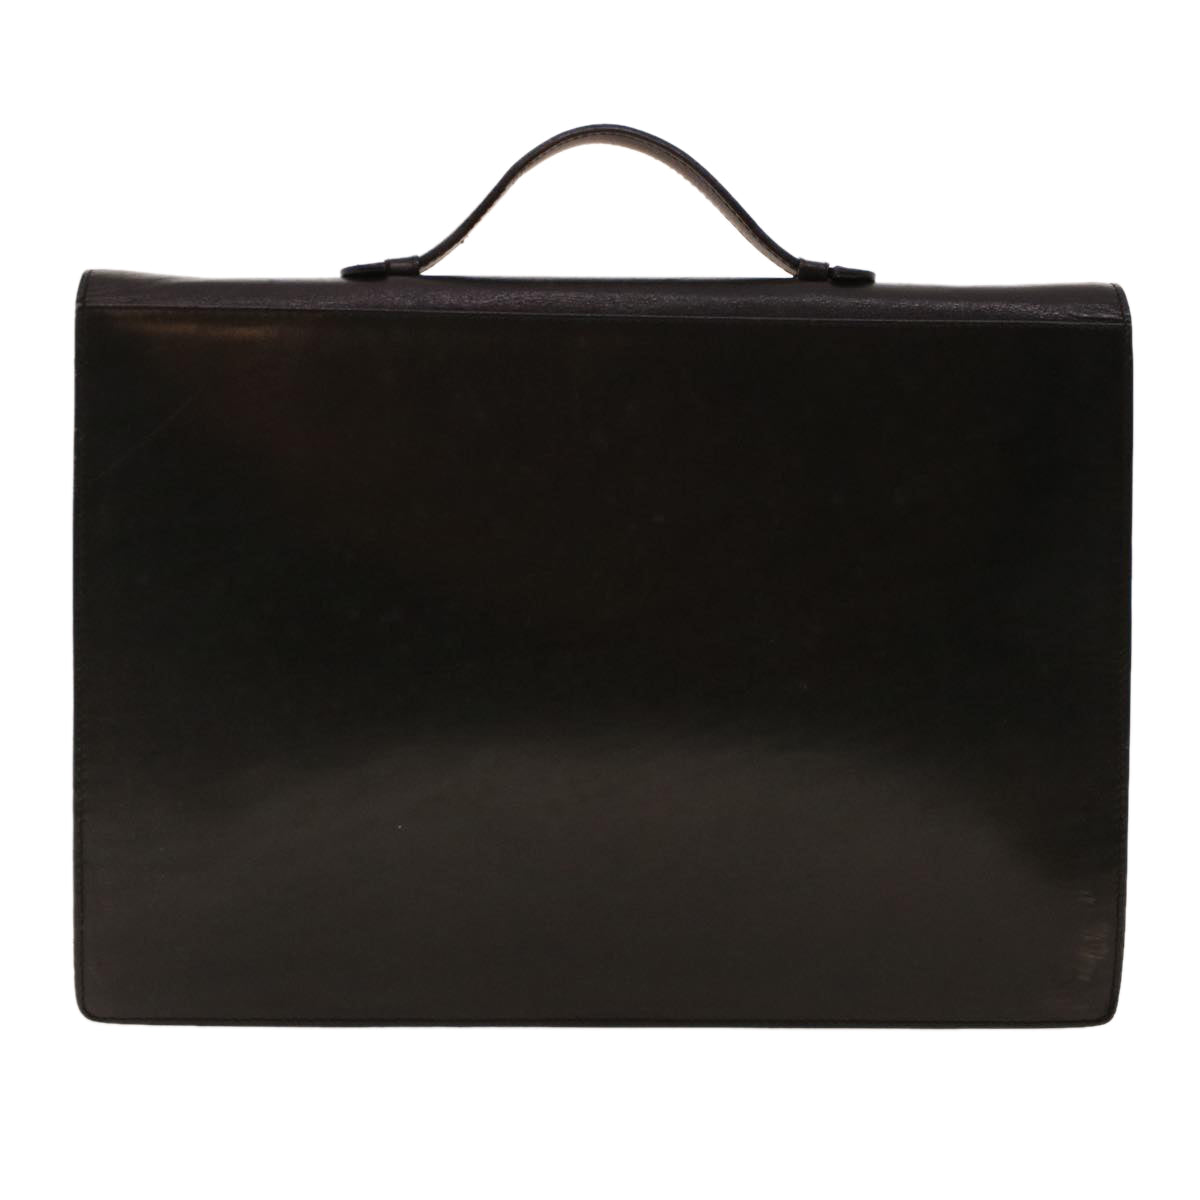 BALLY Business Bag Leather Black Auth bs5218 - 0